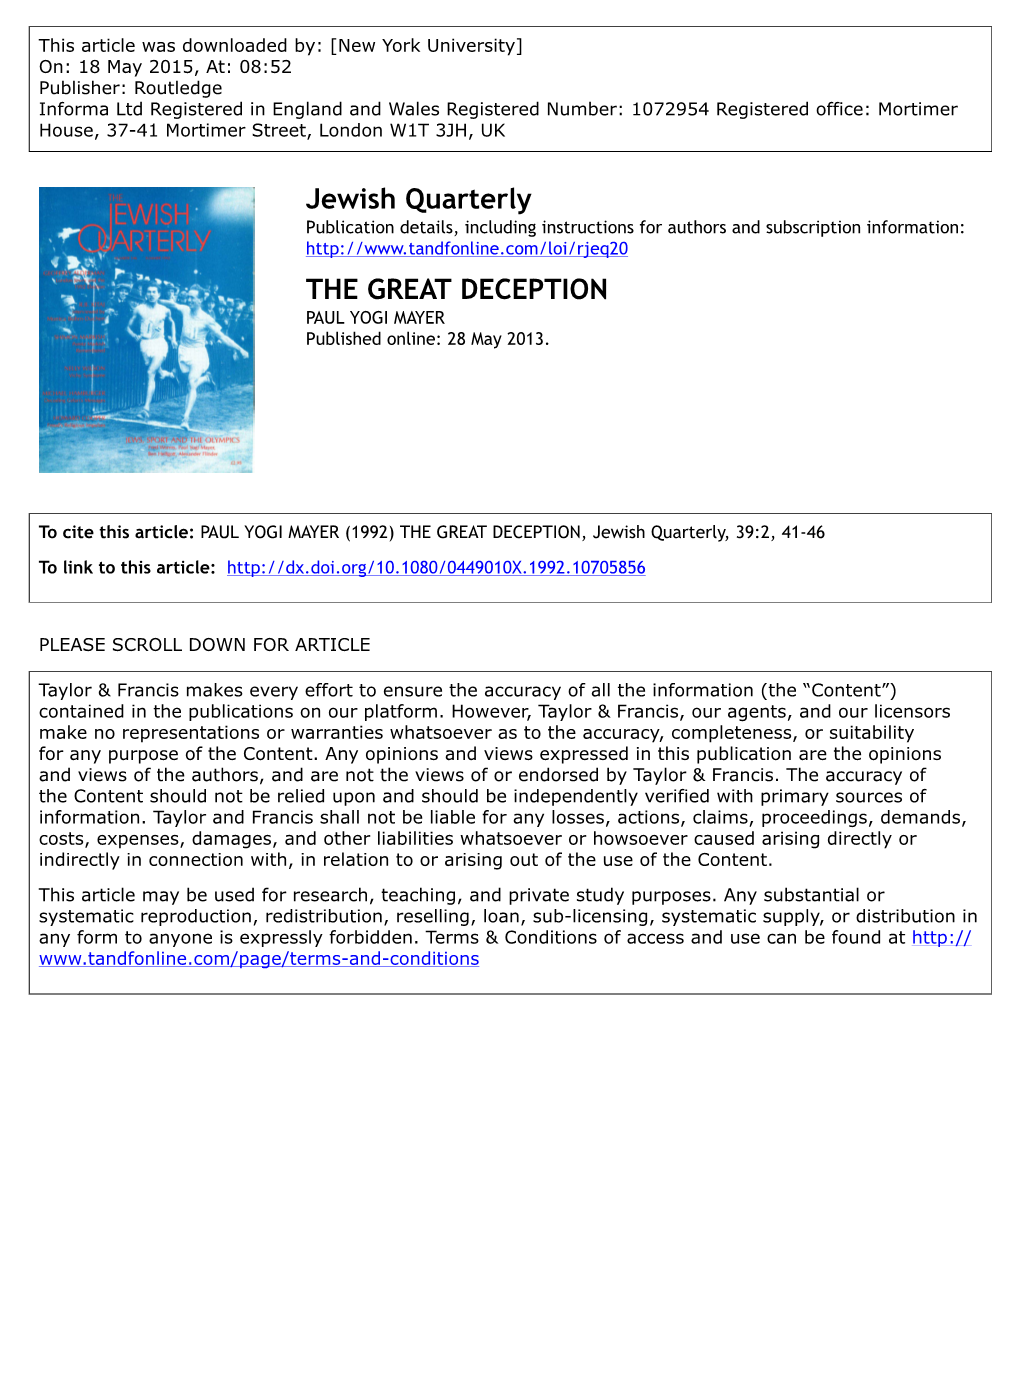 "The Great Deception: a Personal Recollection of Hitler's Olympic